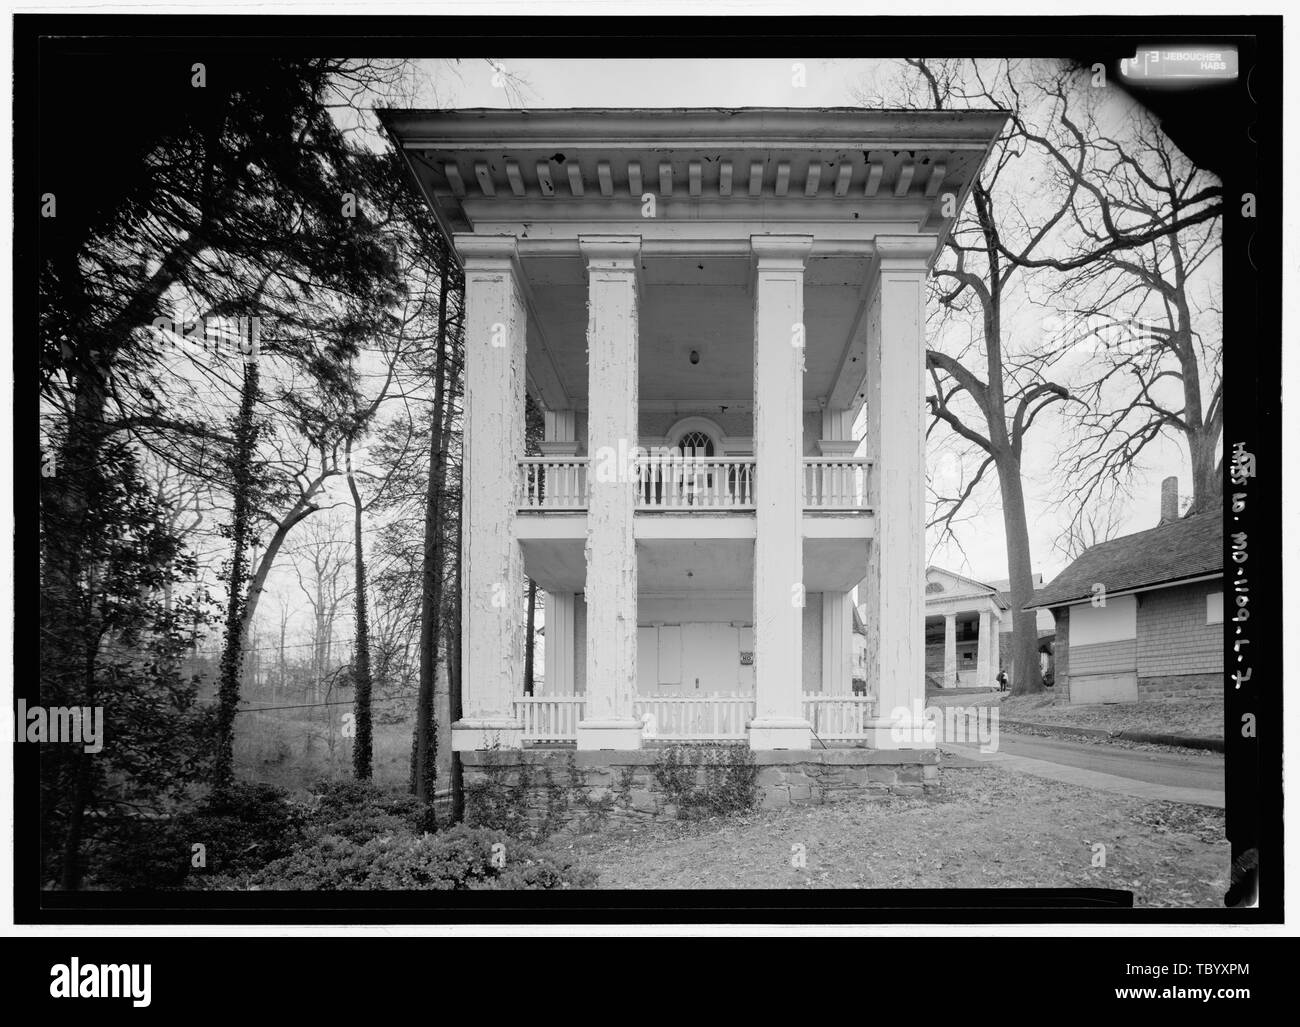 North (front) elevation  National Park Seminary, Colonial House, 2745 Dewitt Circle, Silver Spring, Montgomery County, MD Phi Delta Psi sorority Cassedy, John Irving, A Price, Virginia B, transmitter Ott, Cynthia, historian Boucher, Jack E, photographer Price, Virginia B, transmitter Lavoie, Catherine C, project manager Price, Virginia B, transmitter Stock Photo